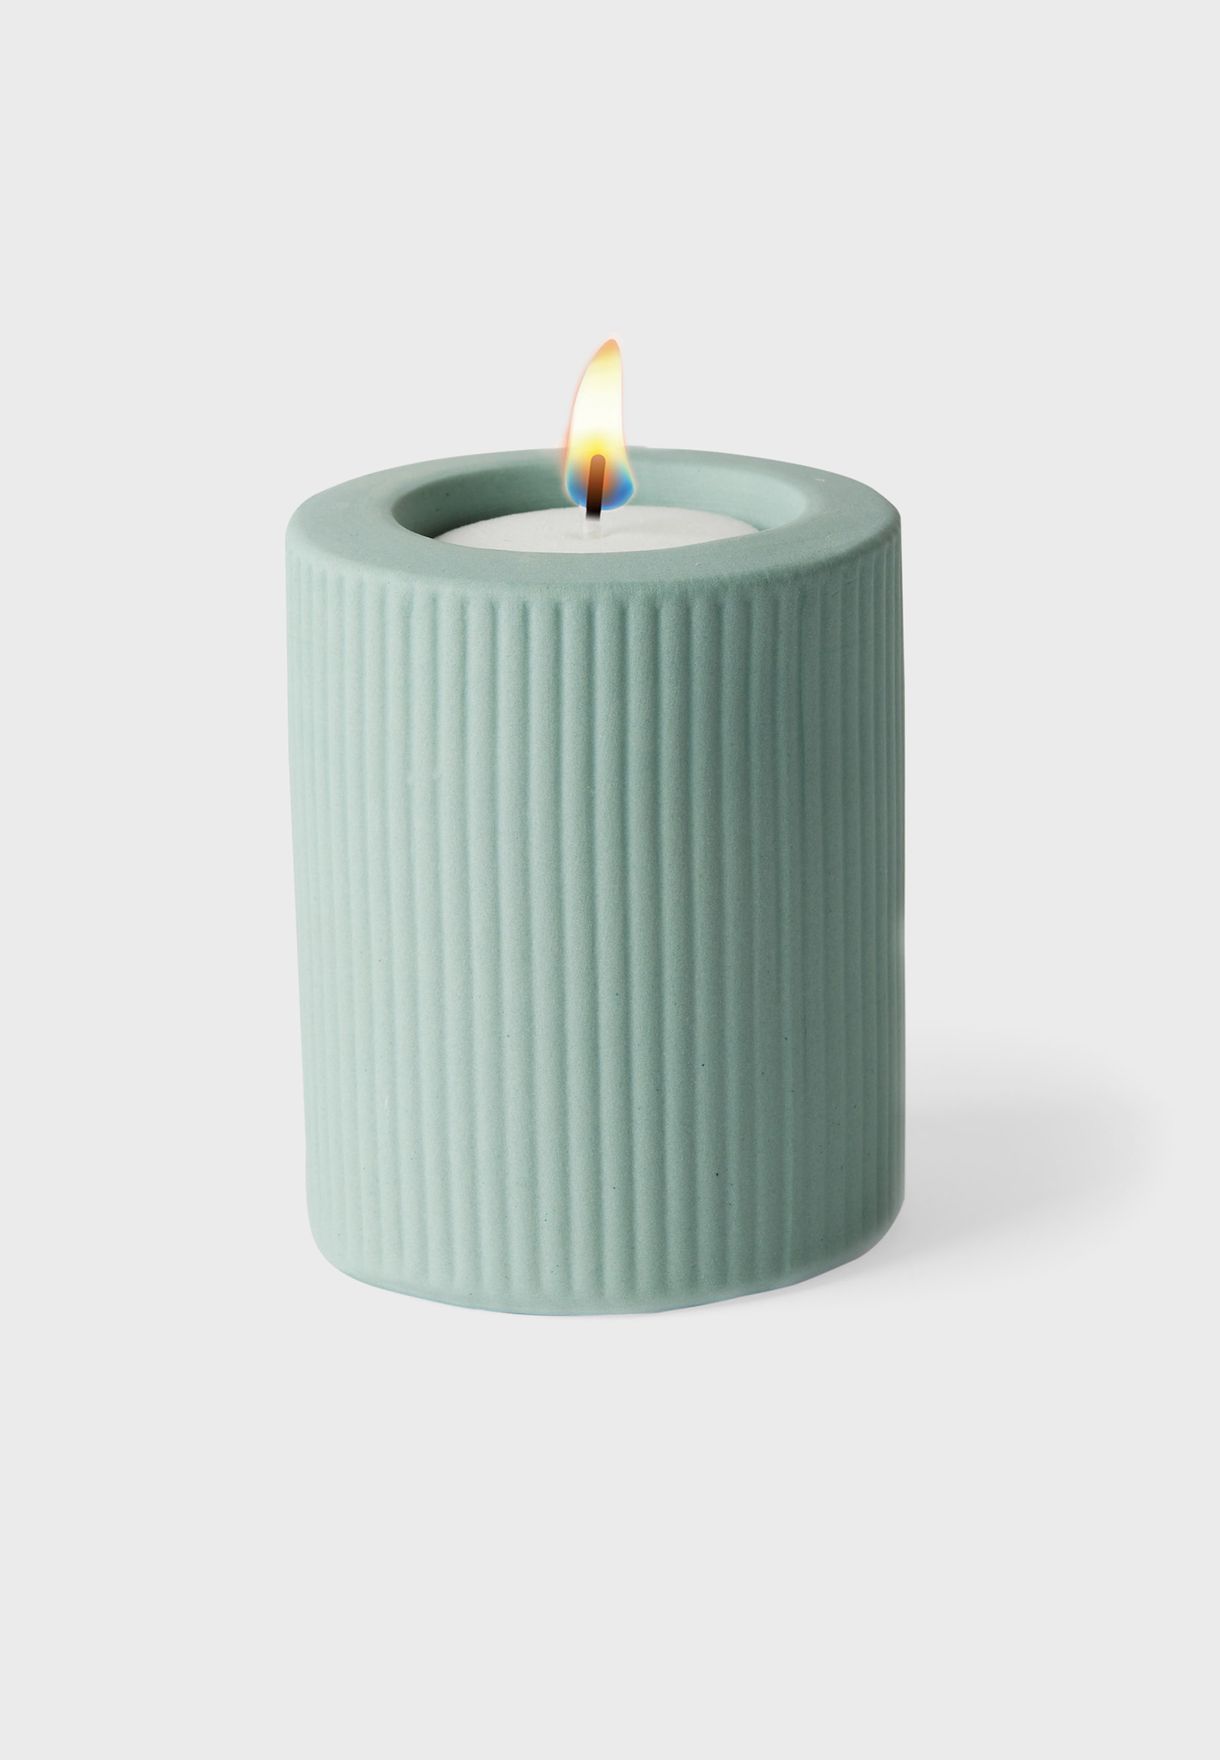 Odessa' Dusty Teal Tealight Candle Holder